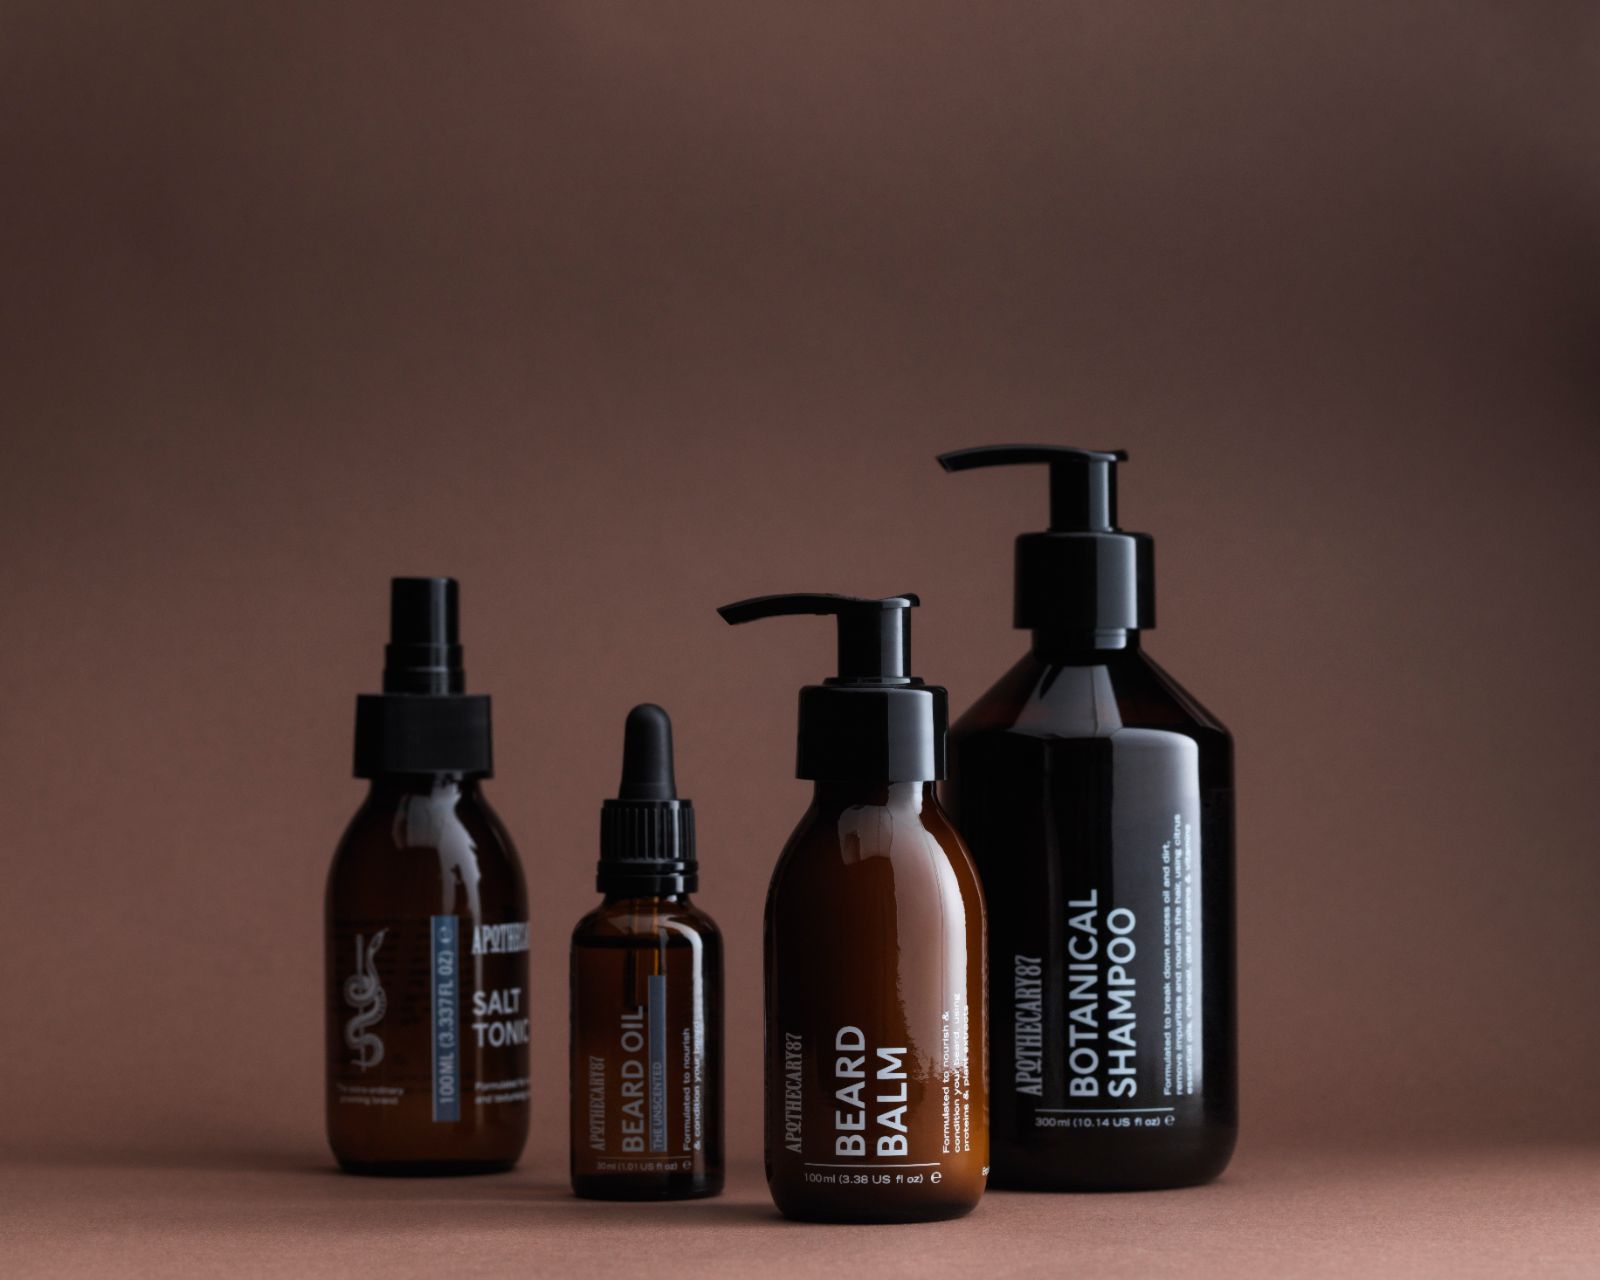 4 brown glass bottles of Apothecary 87 grooming products - branding and packaging design by 93ft Design. 